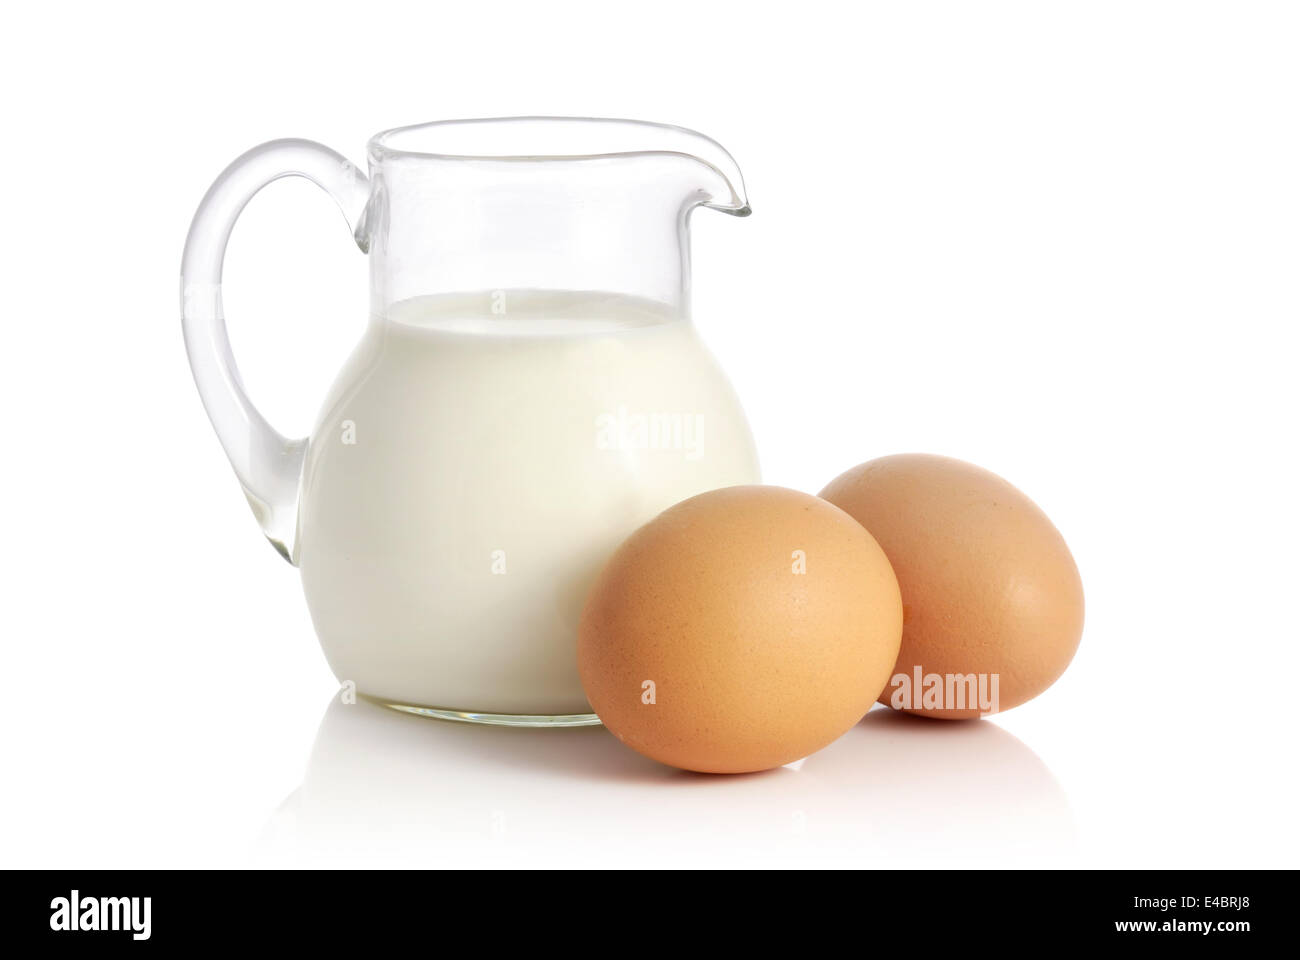 One liter of fresh milk and two eggs Stock Photo